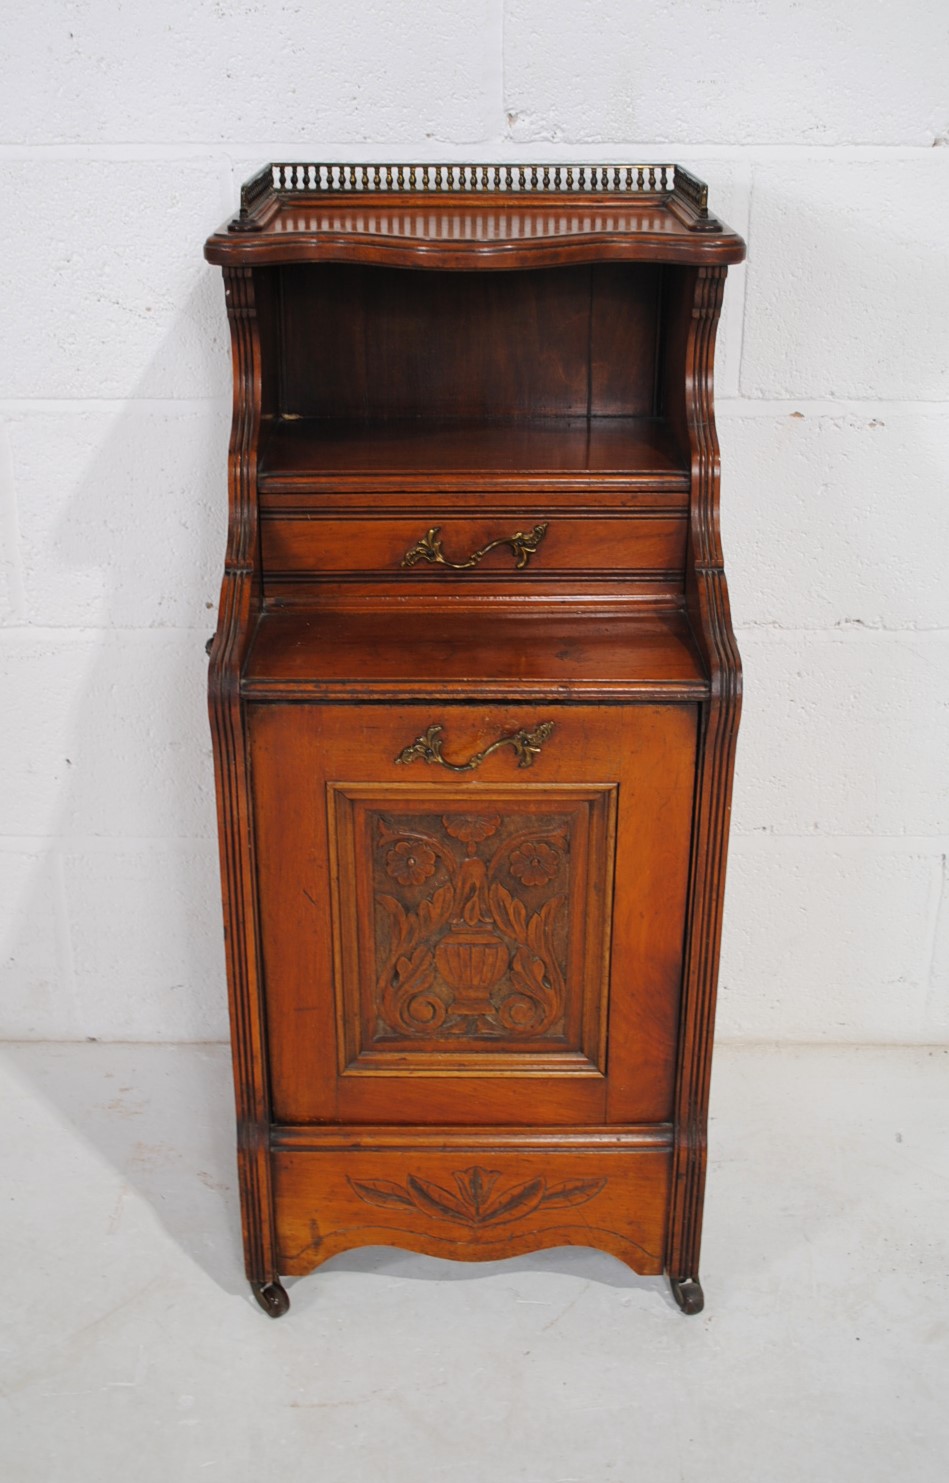 A turn of the century mahogany purdonium , with brass gallery to top